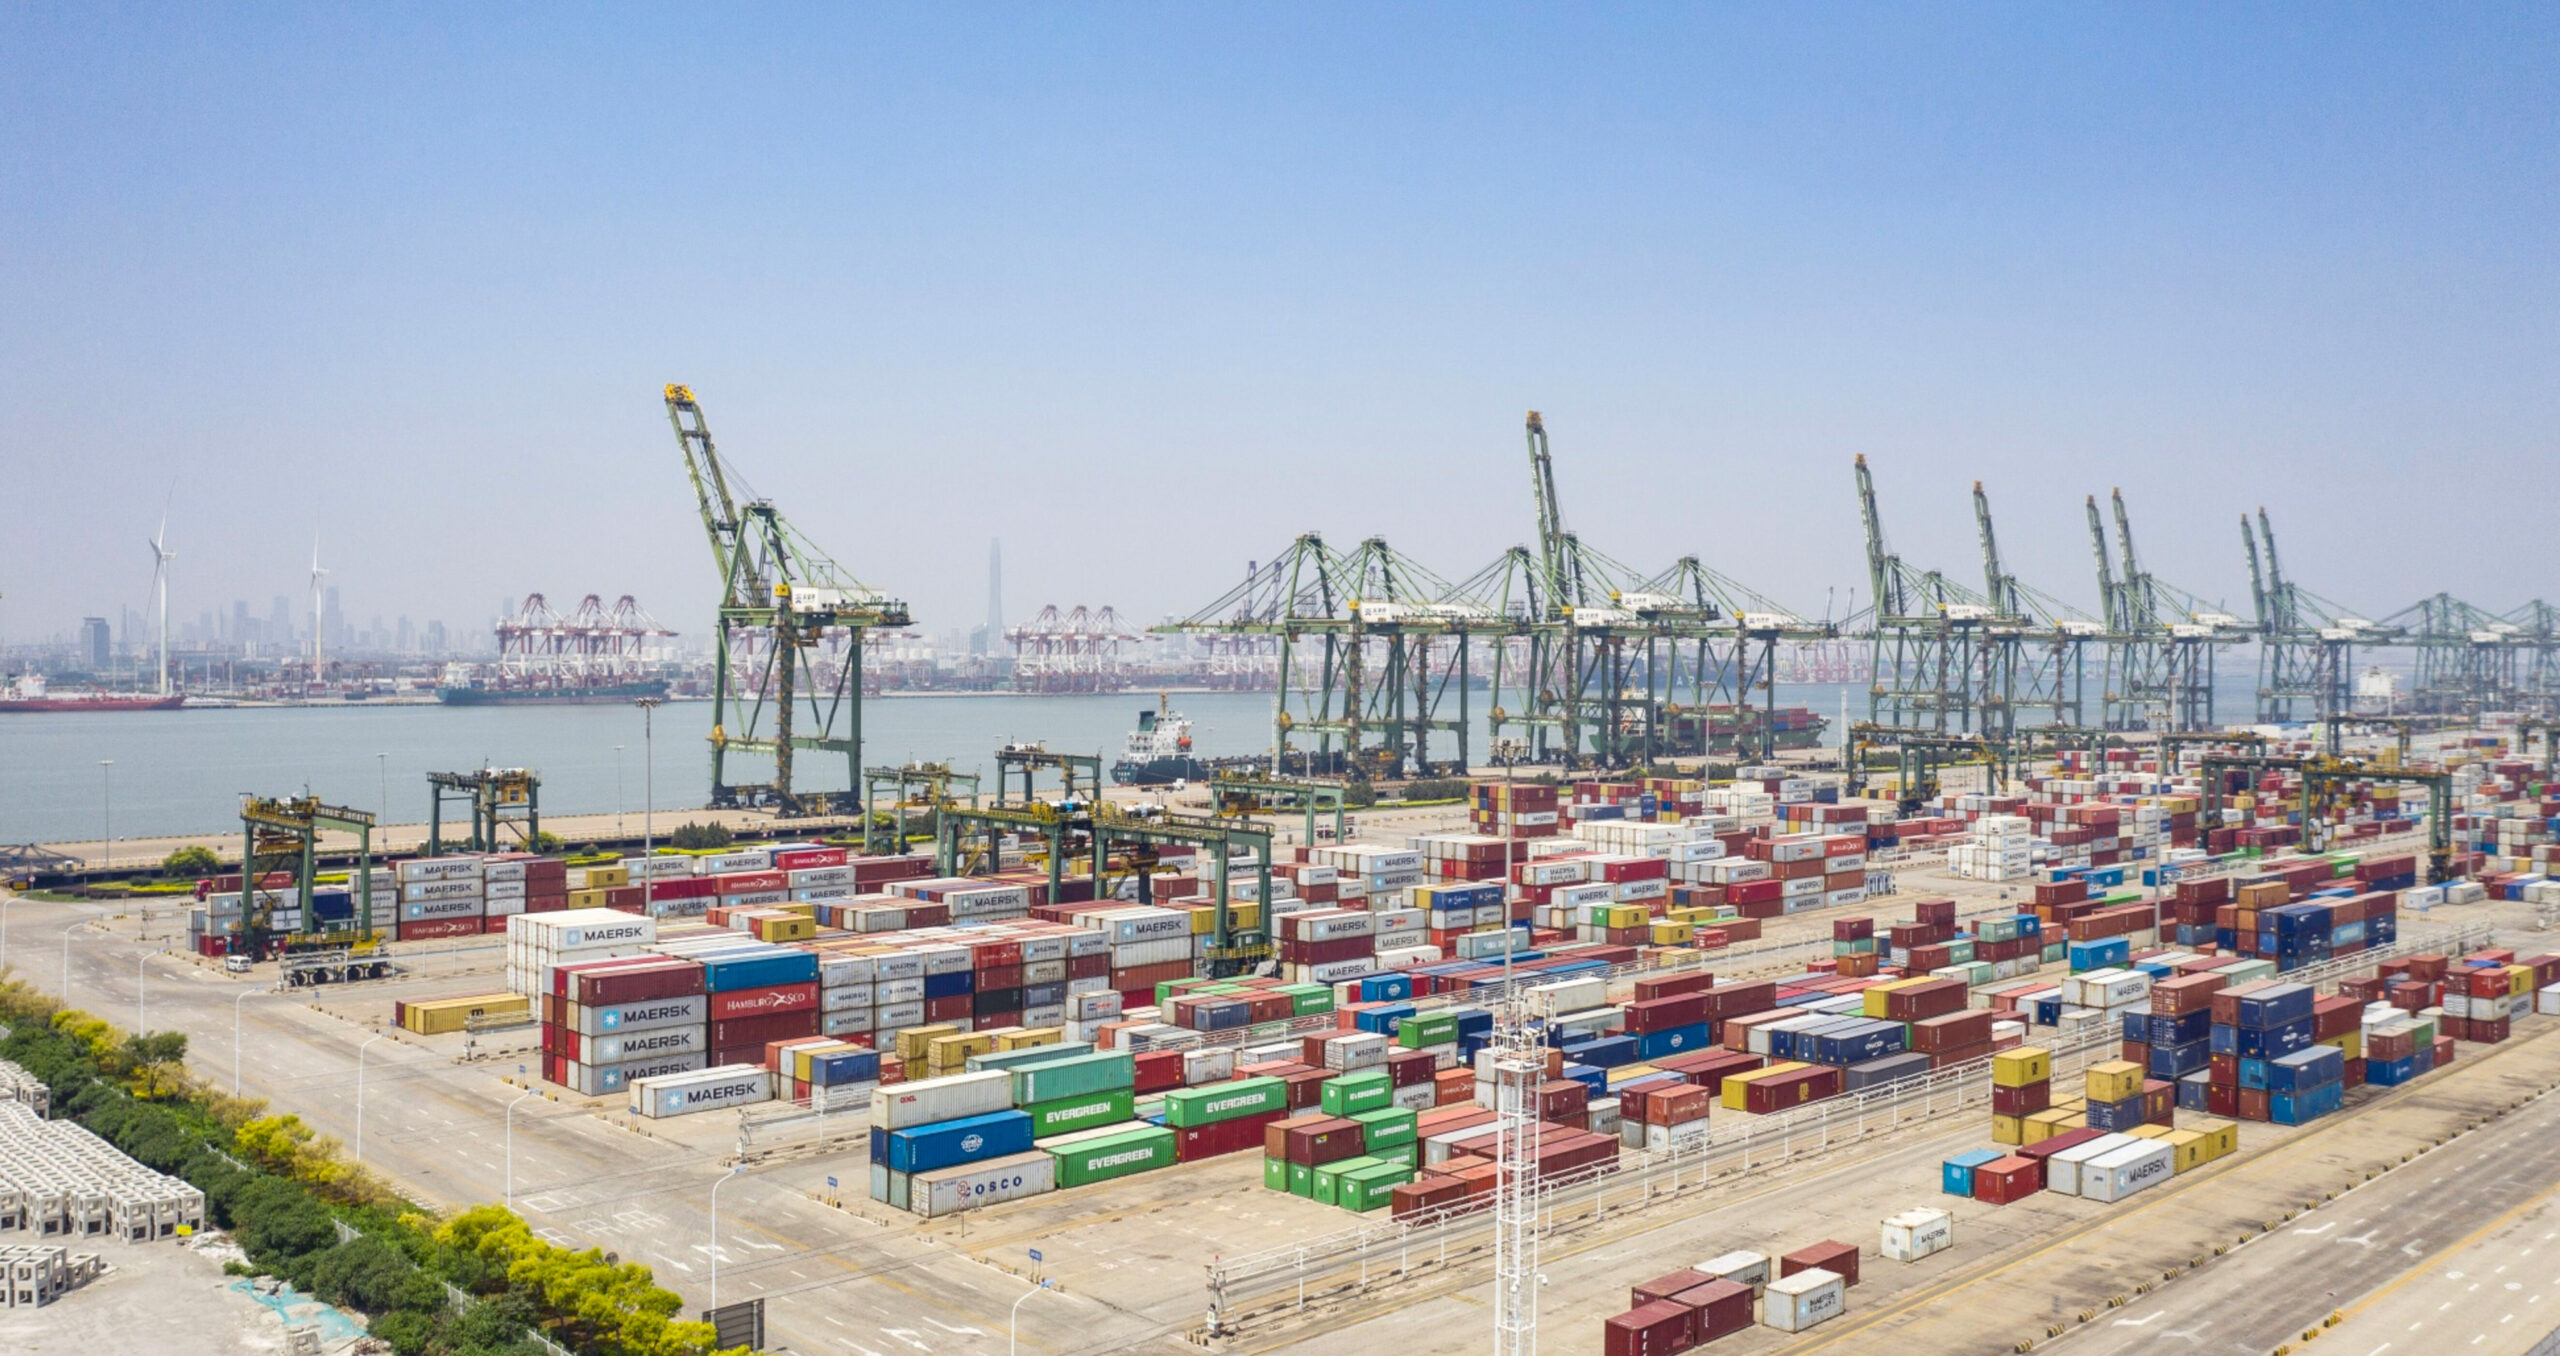 Tianjin port in China. Globally, shipping is estimated to be responsible for 3 per cent of global carbon emissions but, according to the OECD, delivers 90 per cent of trade worldwide. (Photo: Qilai Shen/Bloomberg) 